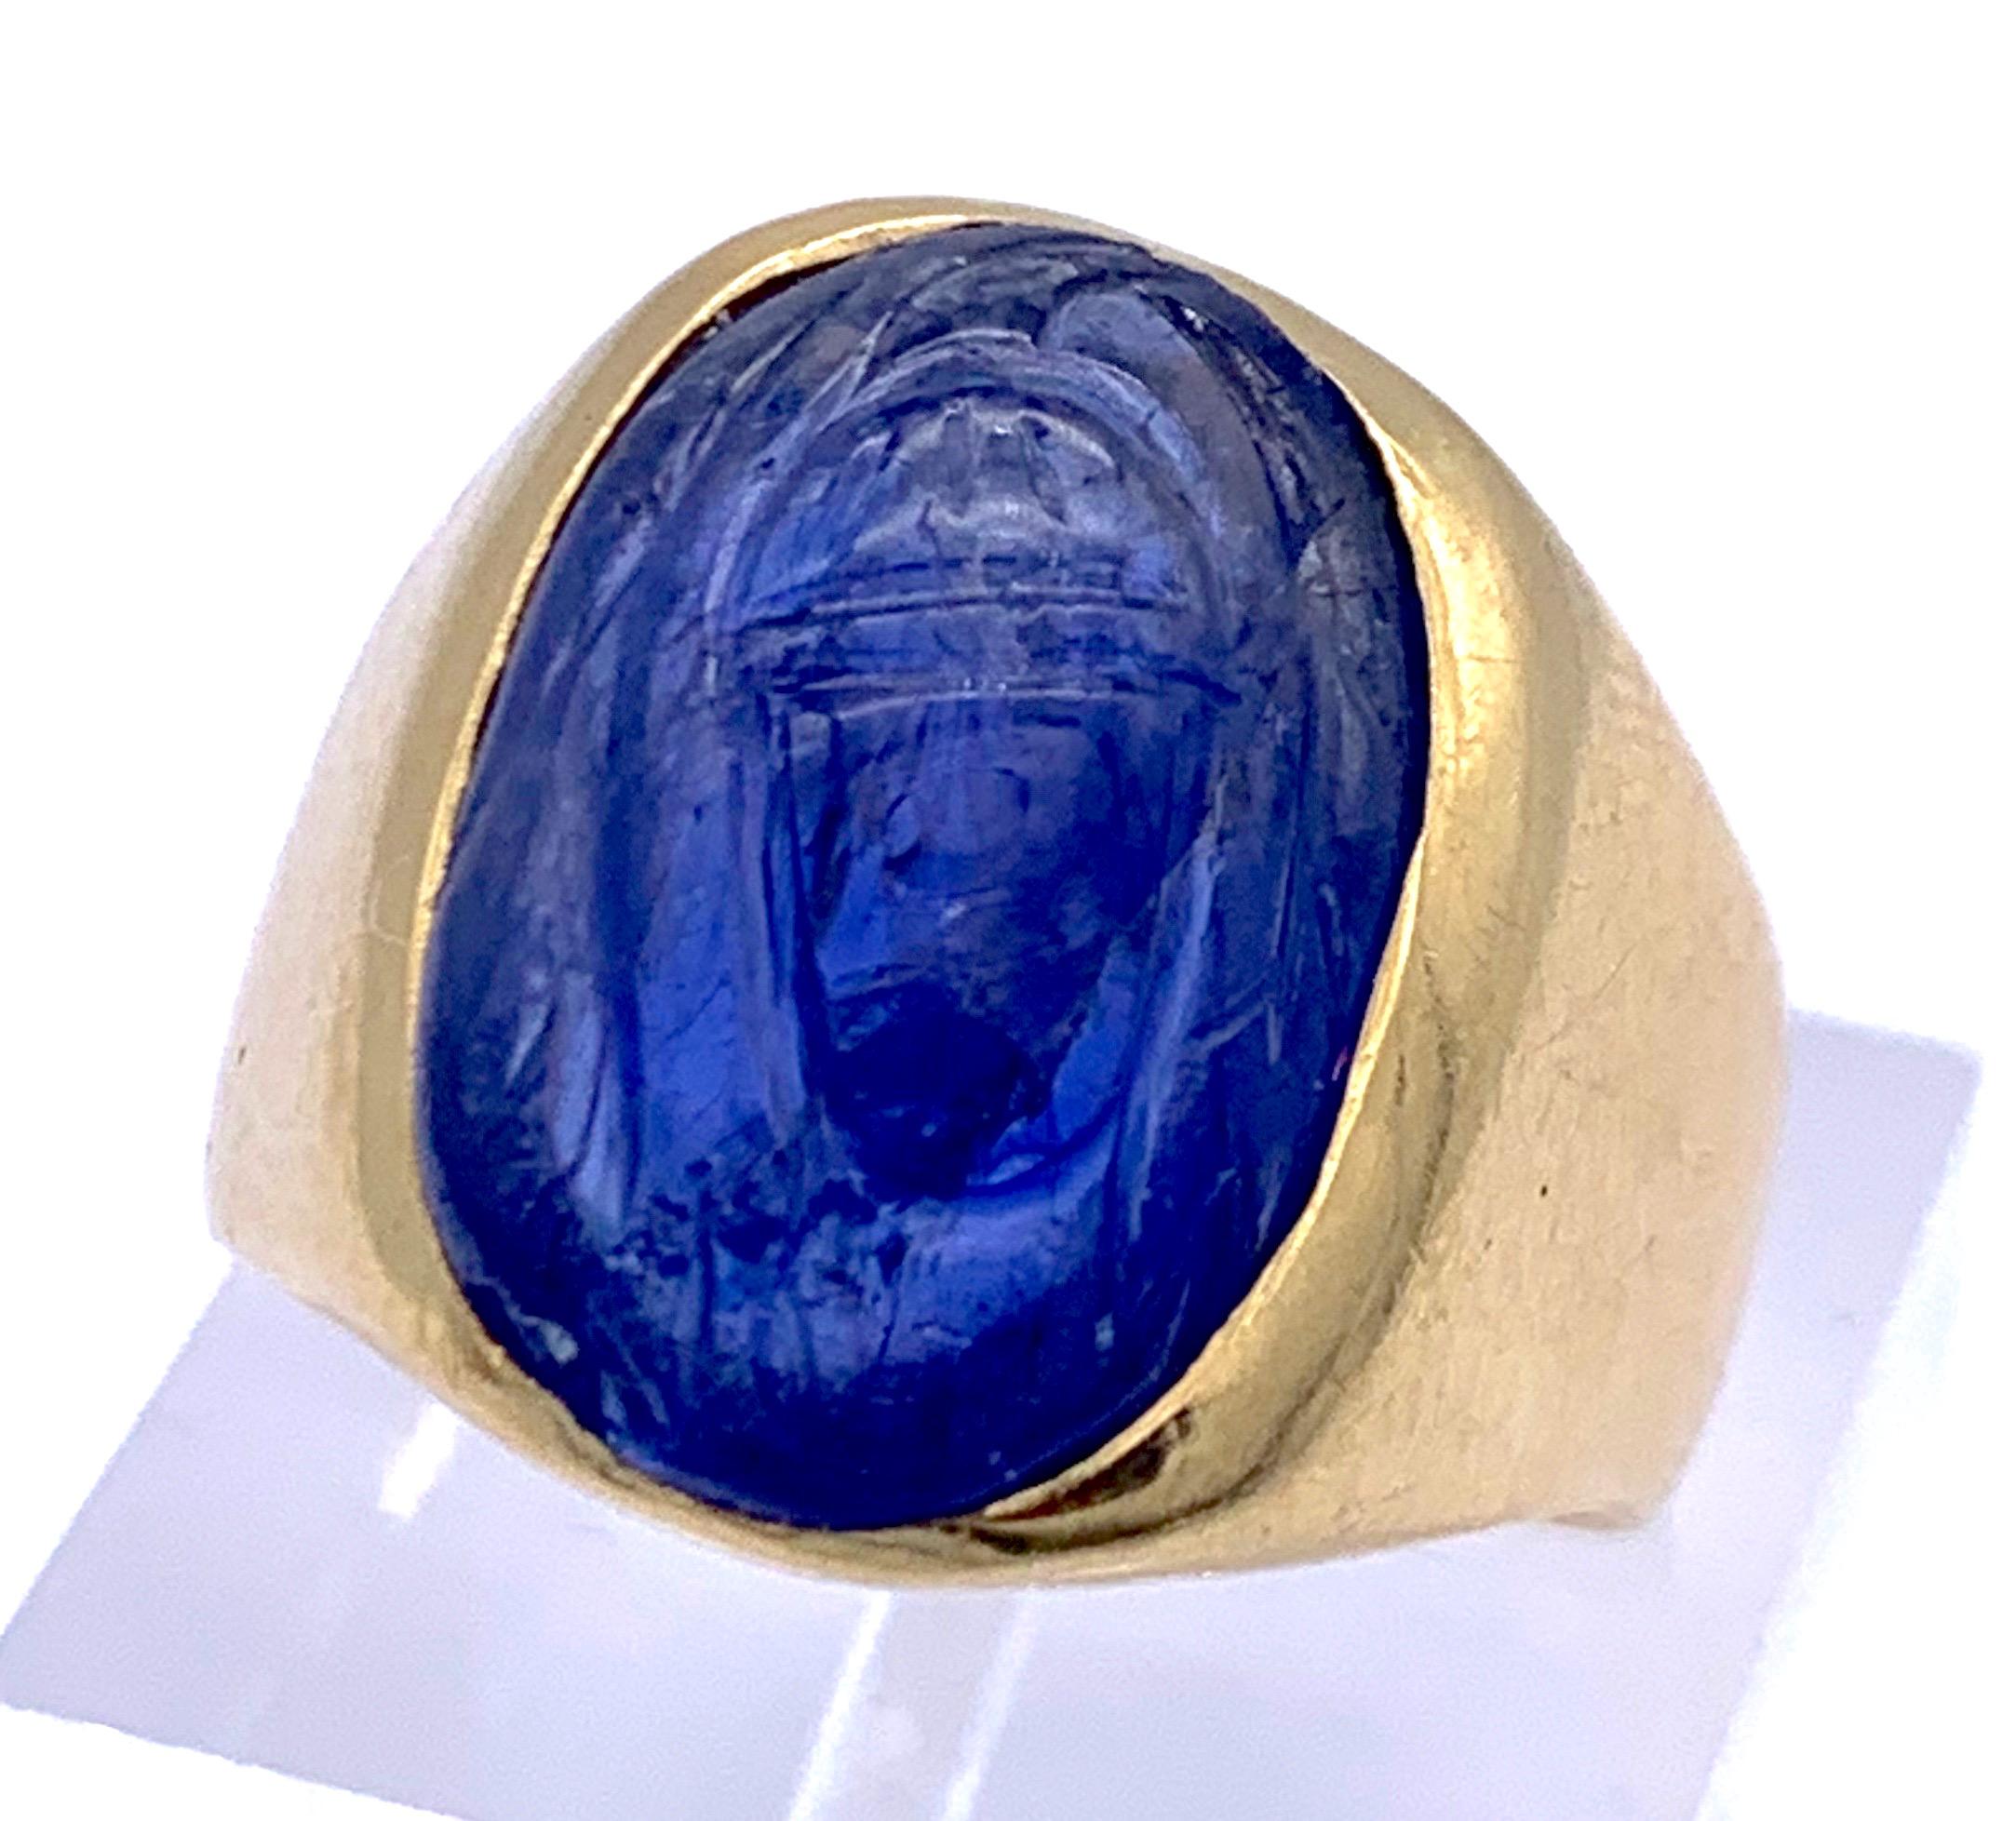 This is a smoth and wonderfully bright sapphire ring with an engraved scarab dating from the 1880's. In ancient Egyt, the scarab symbolized the power of creation and renewal. It also stood for the egyptian god of the rising sun, Chephre. 

This